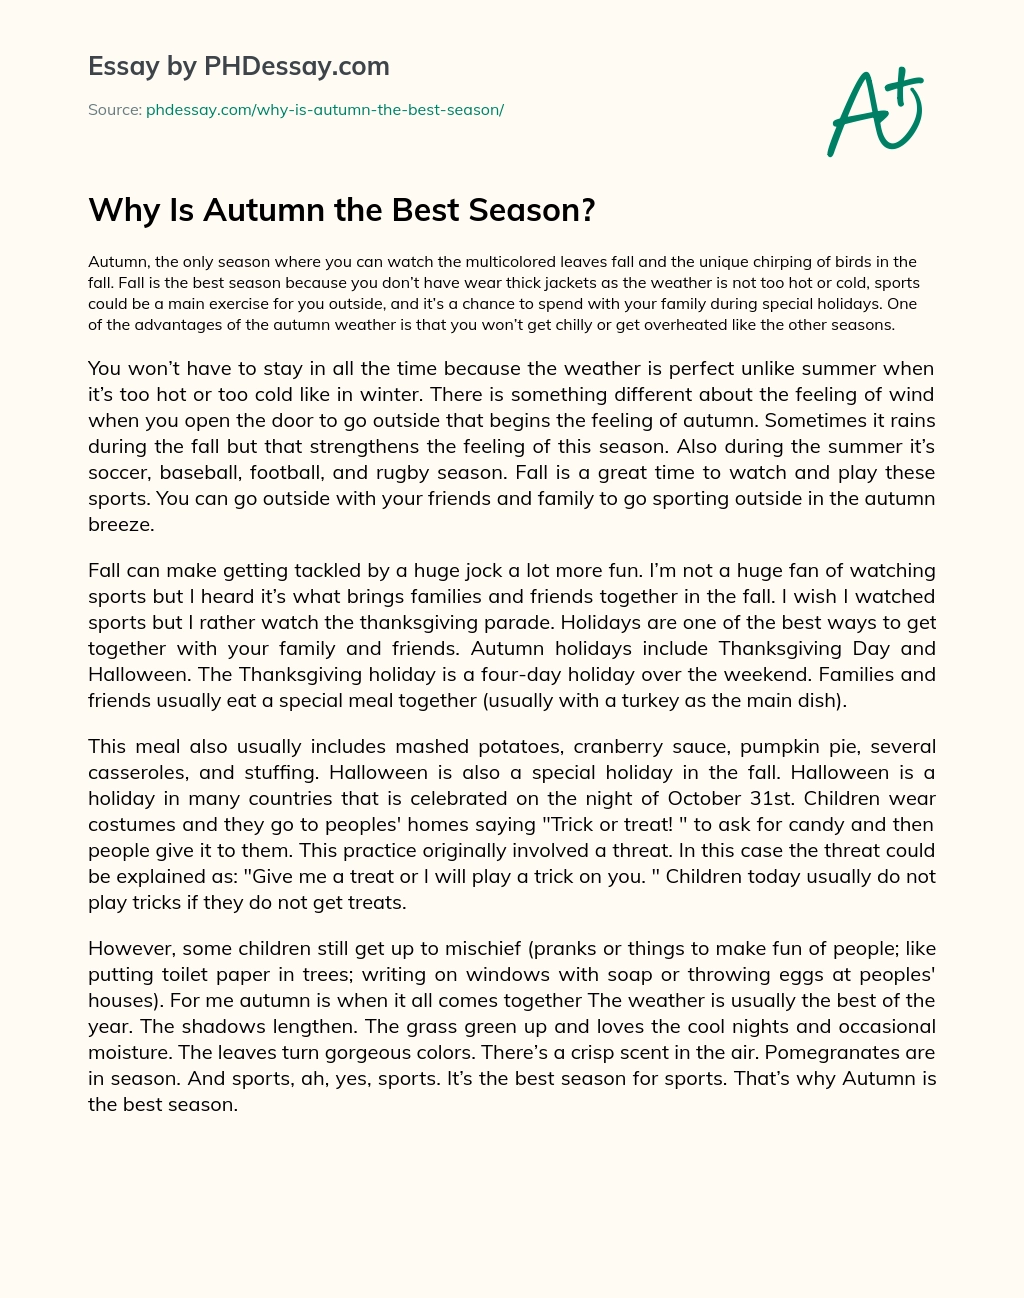 Why Is Autumn the Best Season? essay